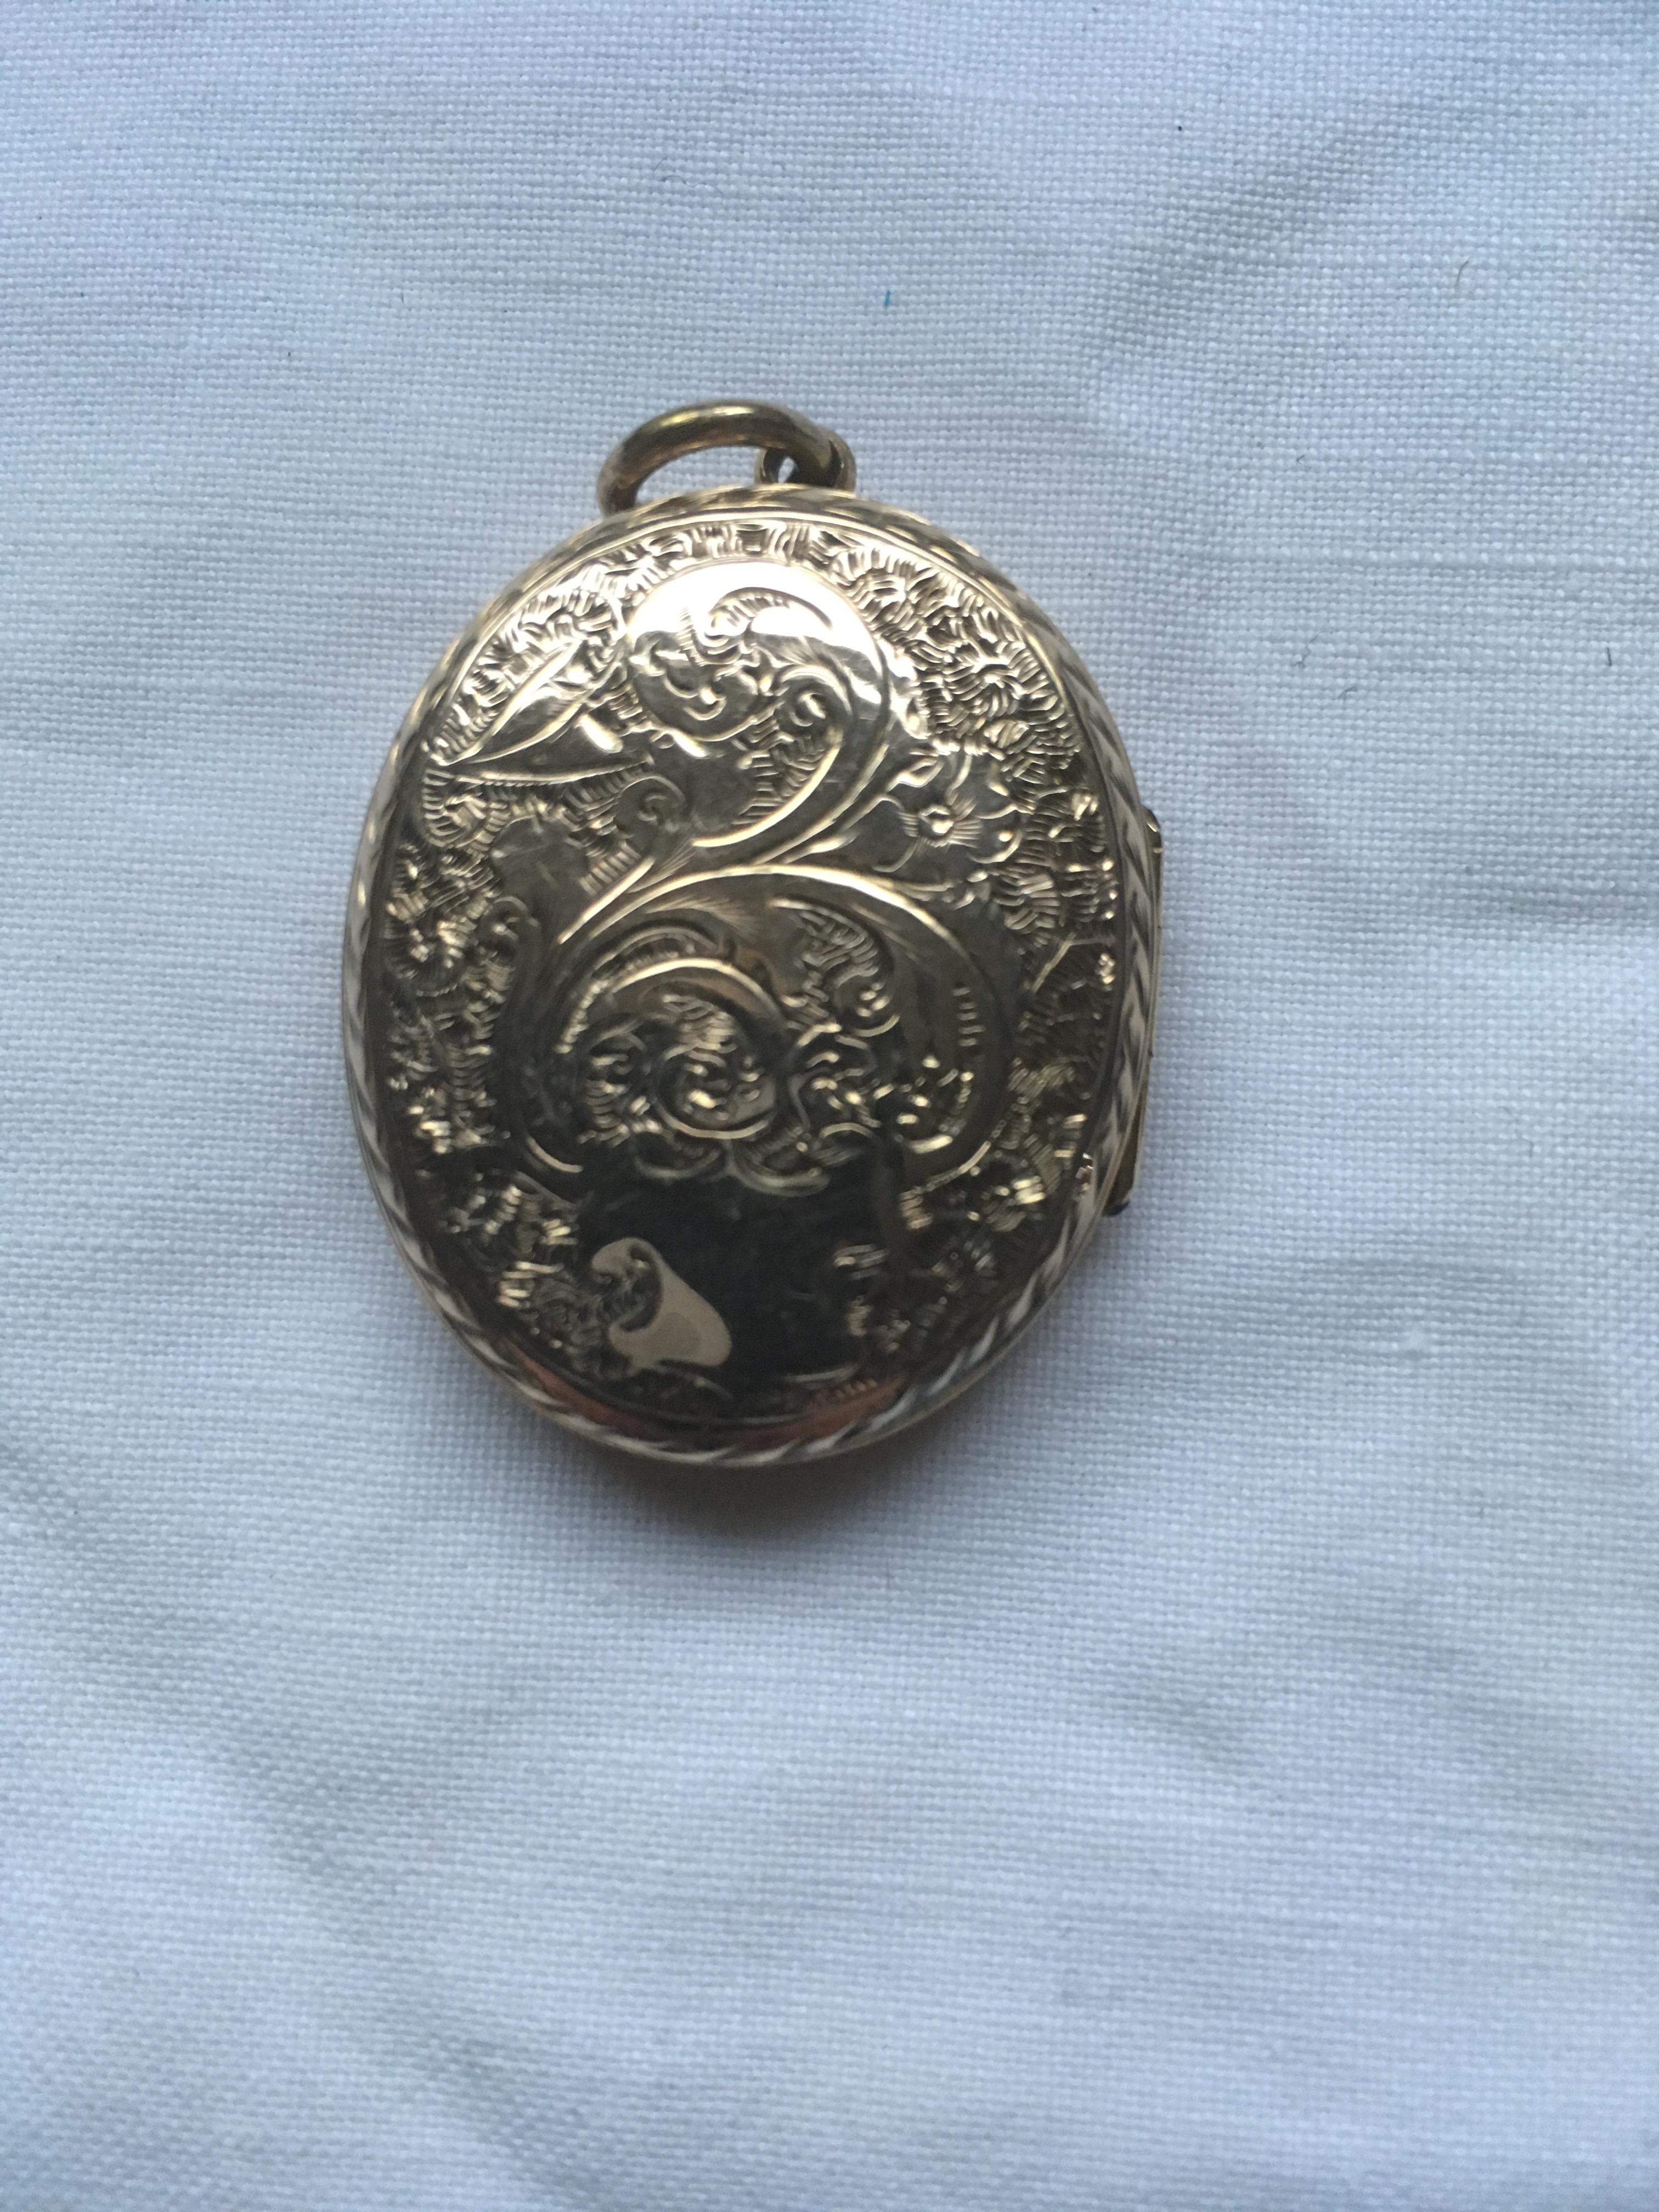 SMALL COLLECTION LOCKETS, BROOCHES ETC INCLUDING SILVER (APPROX 15 ITEMS). - Image 2 of 5